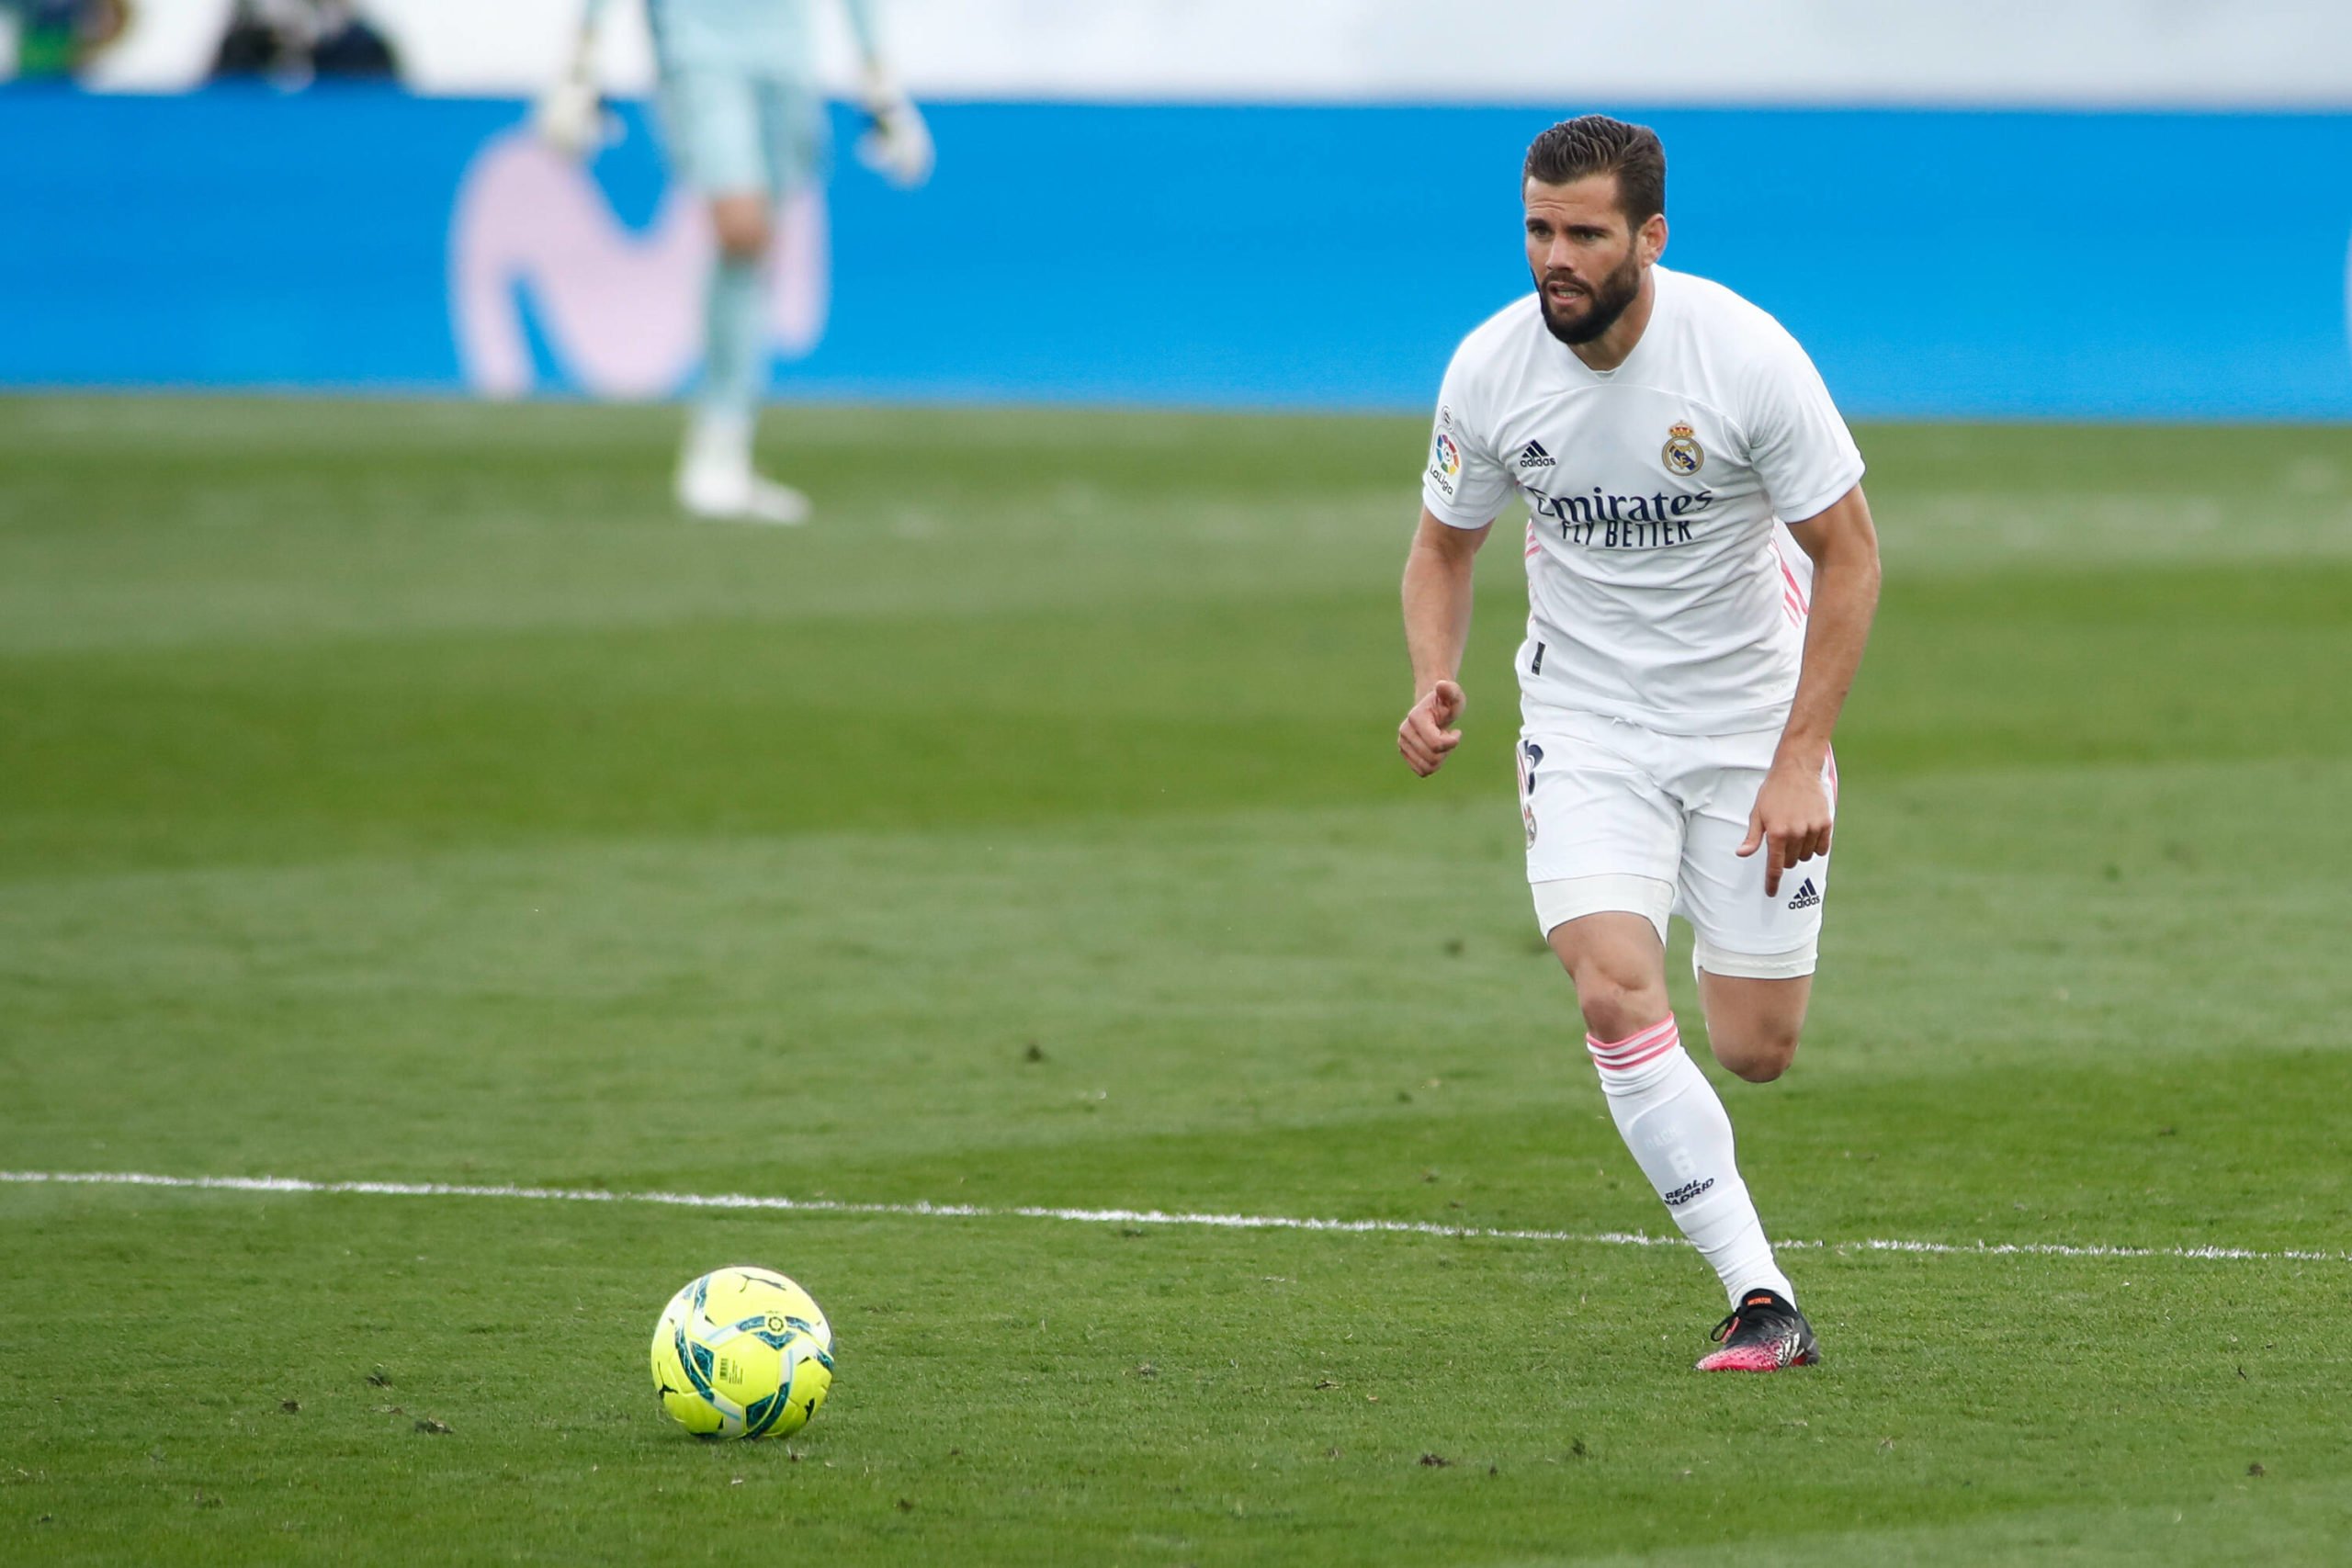 Real Madrid defender Nacho extends contract until 2023 (Nacho is seen in the picture)